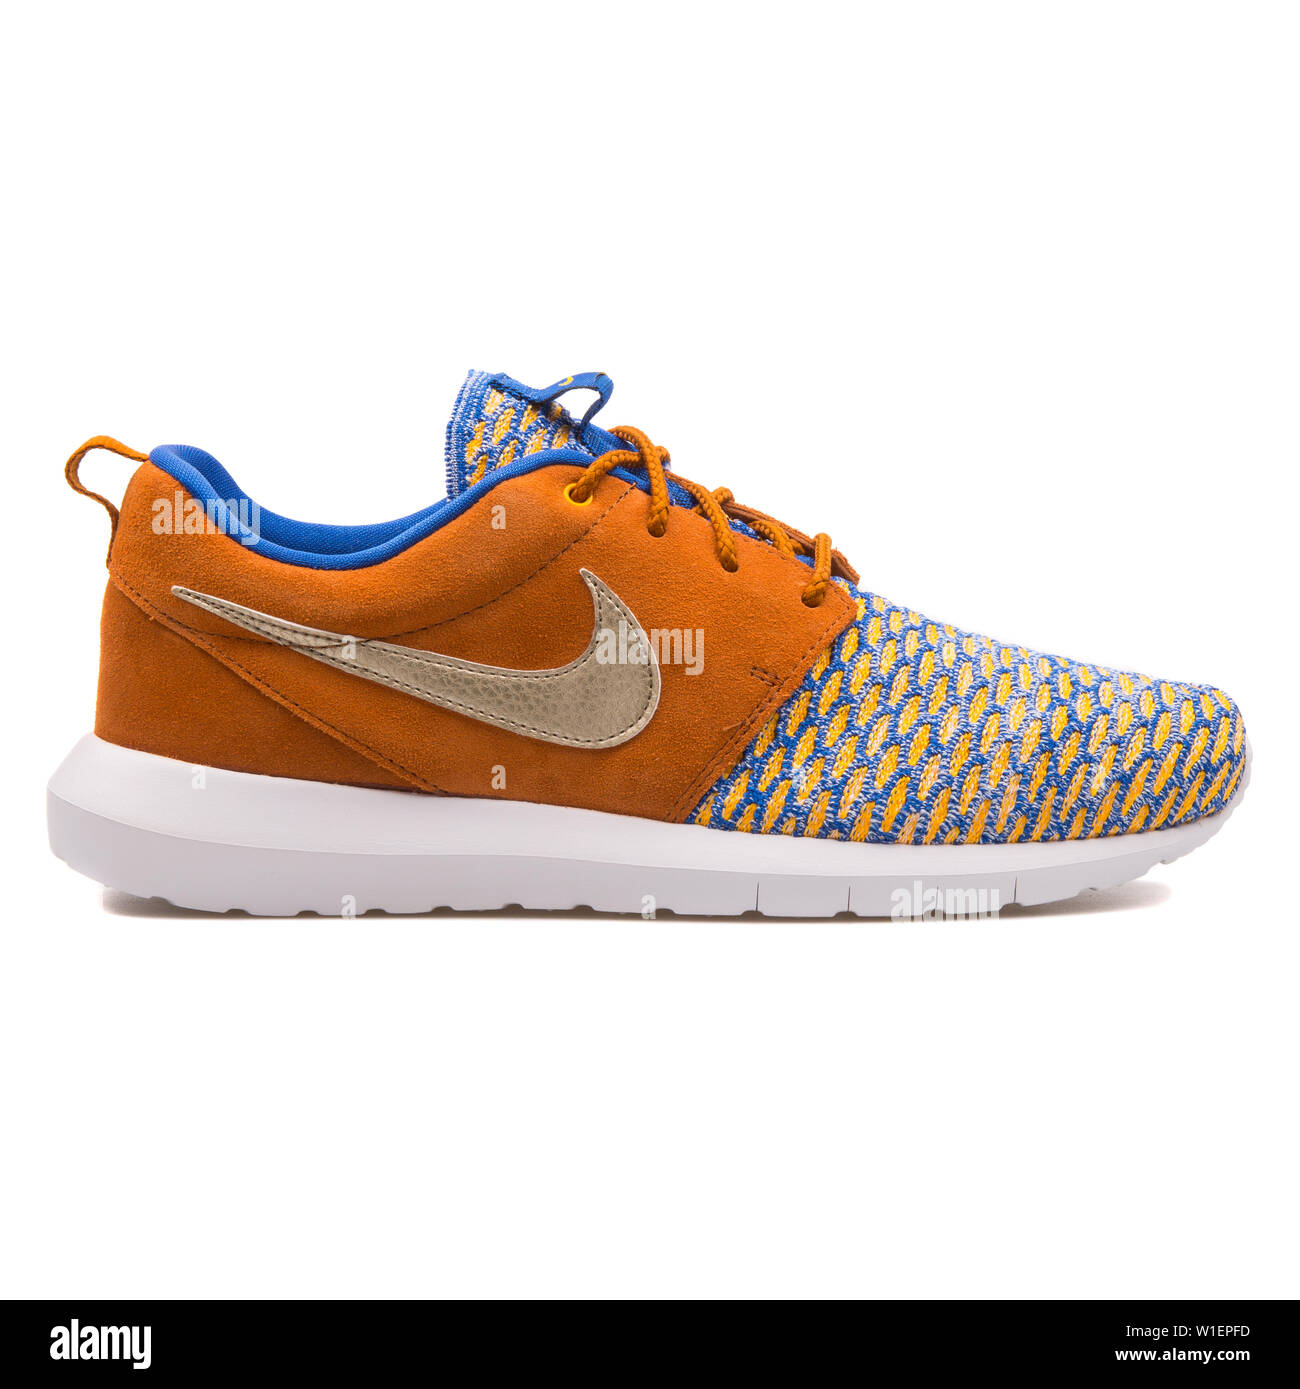 VIENNA, AUSTRIA - AUGUST 10, 2017: Nike Roshe One NM Flyknit Premium brown,  gold and blue sneaker on white background Stock Photo - Alamy